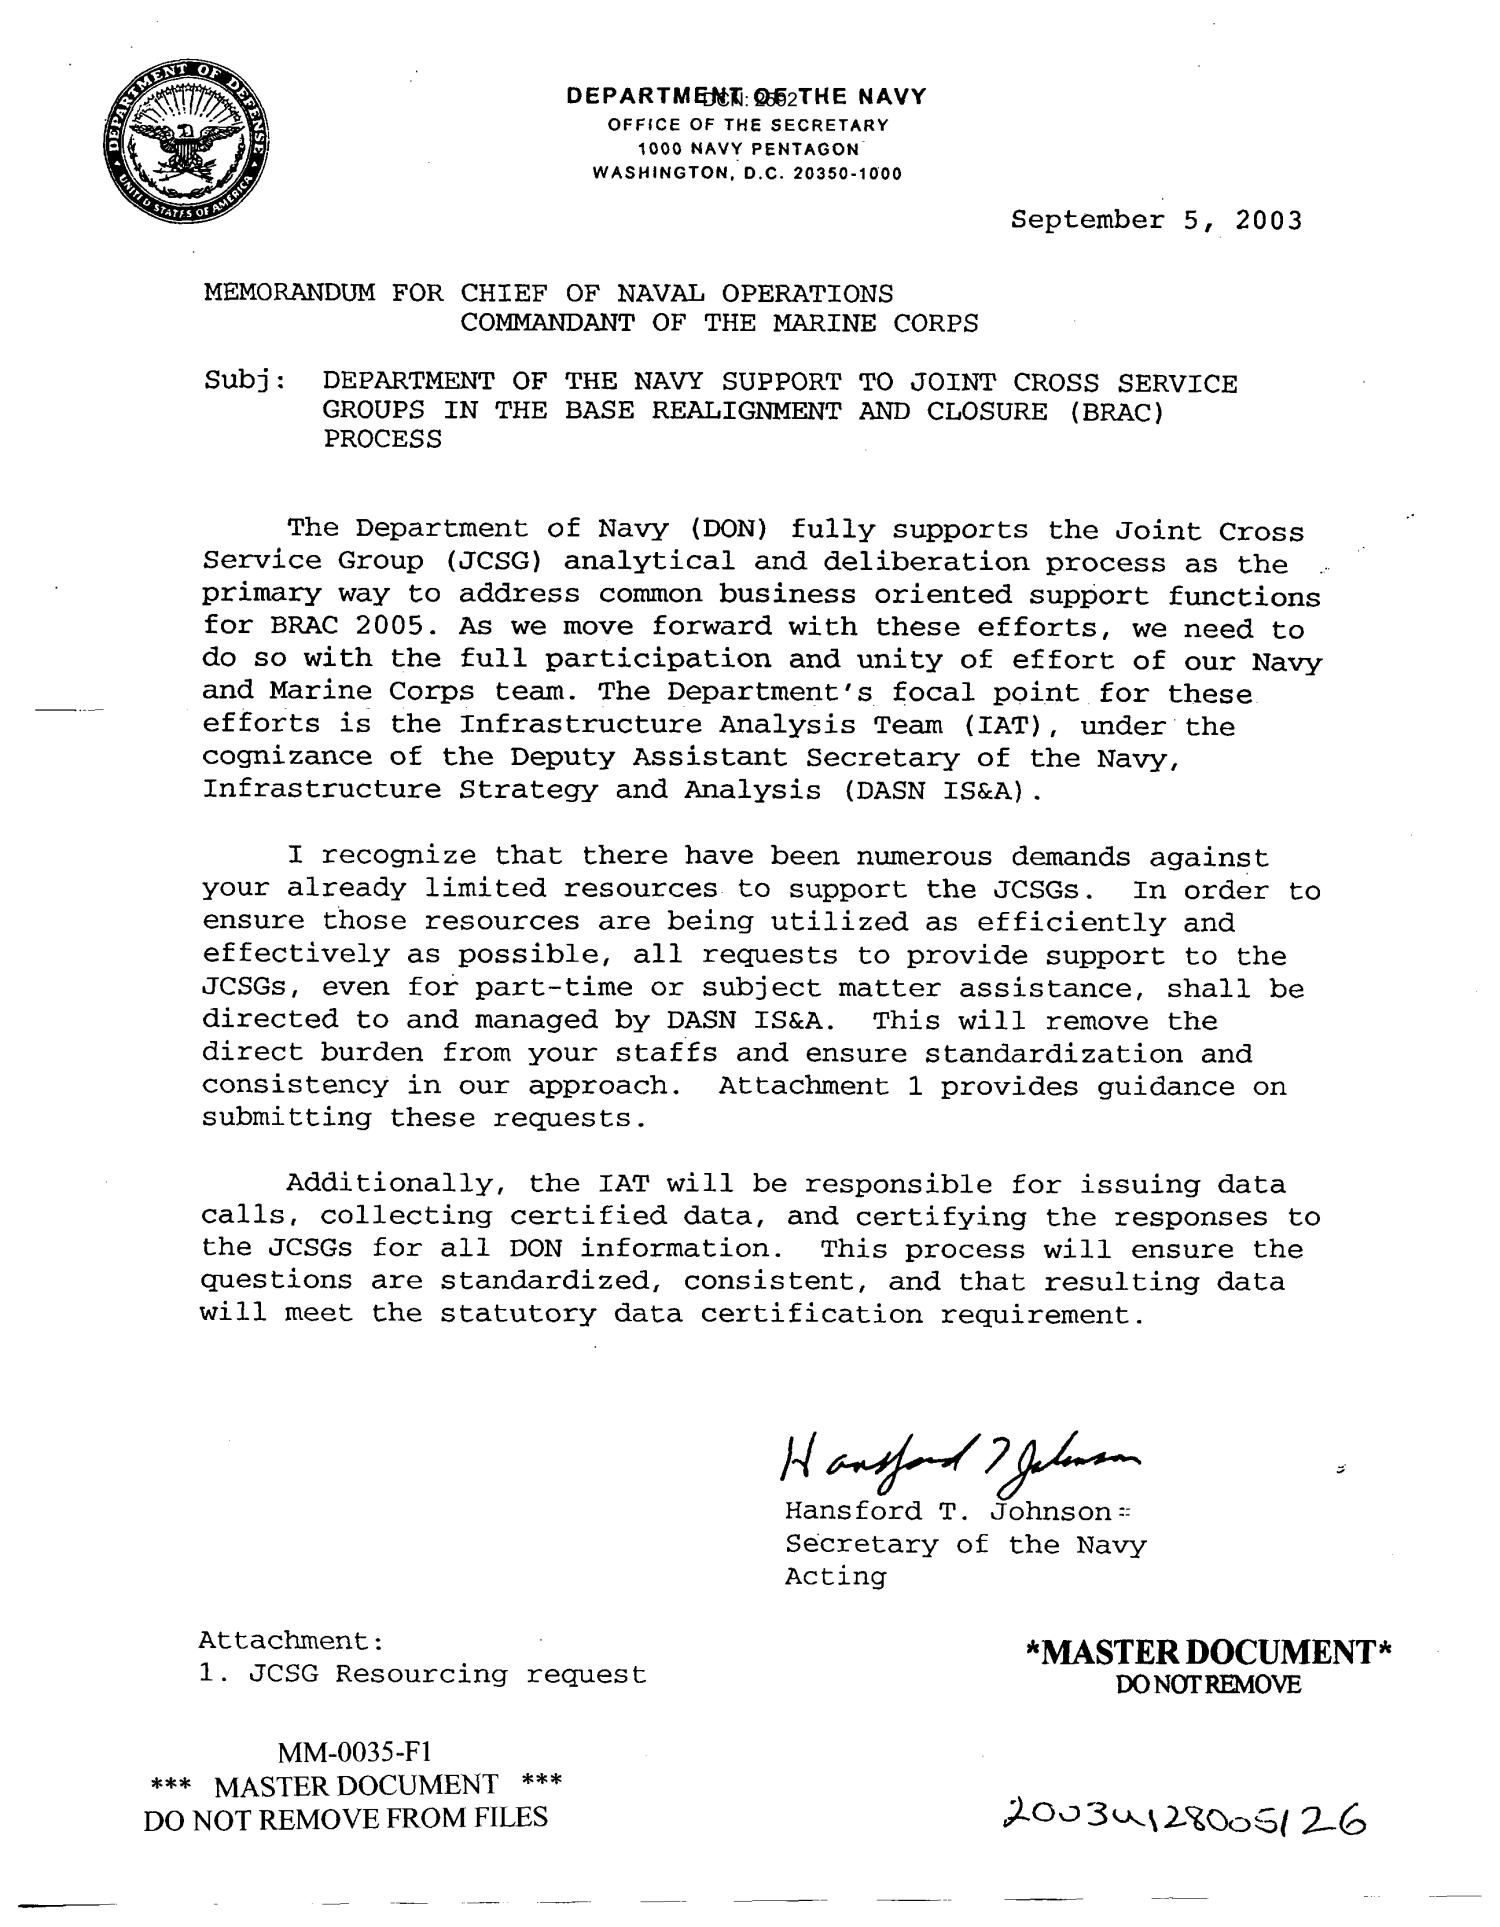 memorandum-for-chief-of-naval-operations-page-1-of-2-unt-digital-library